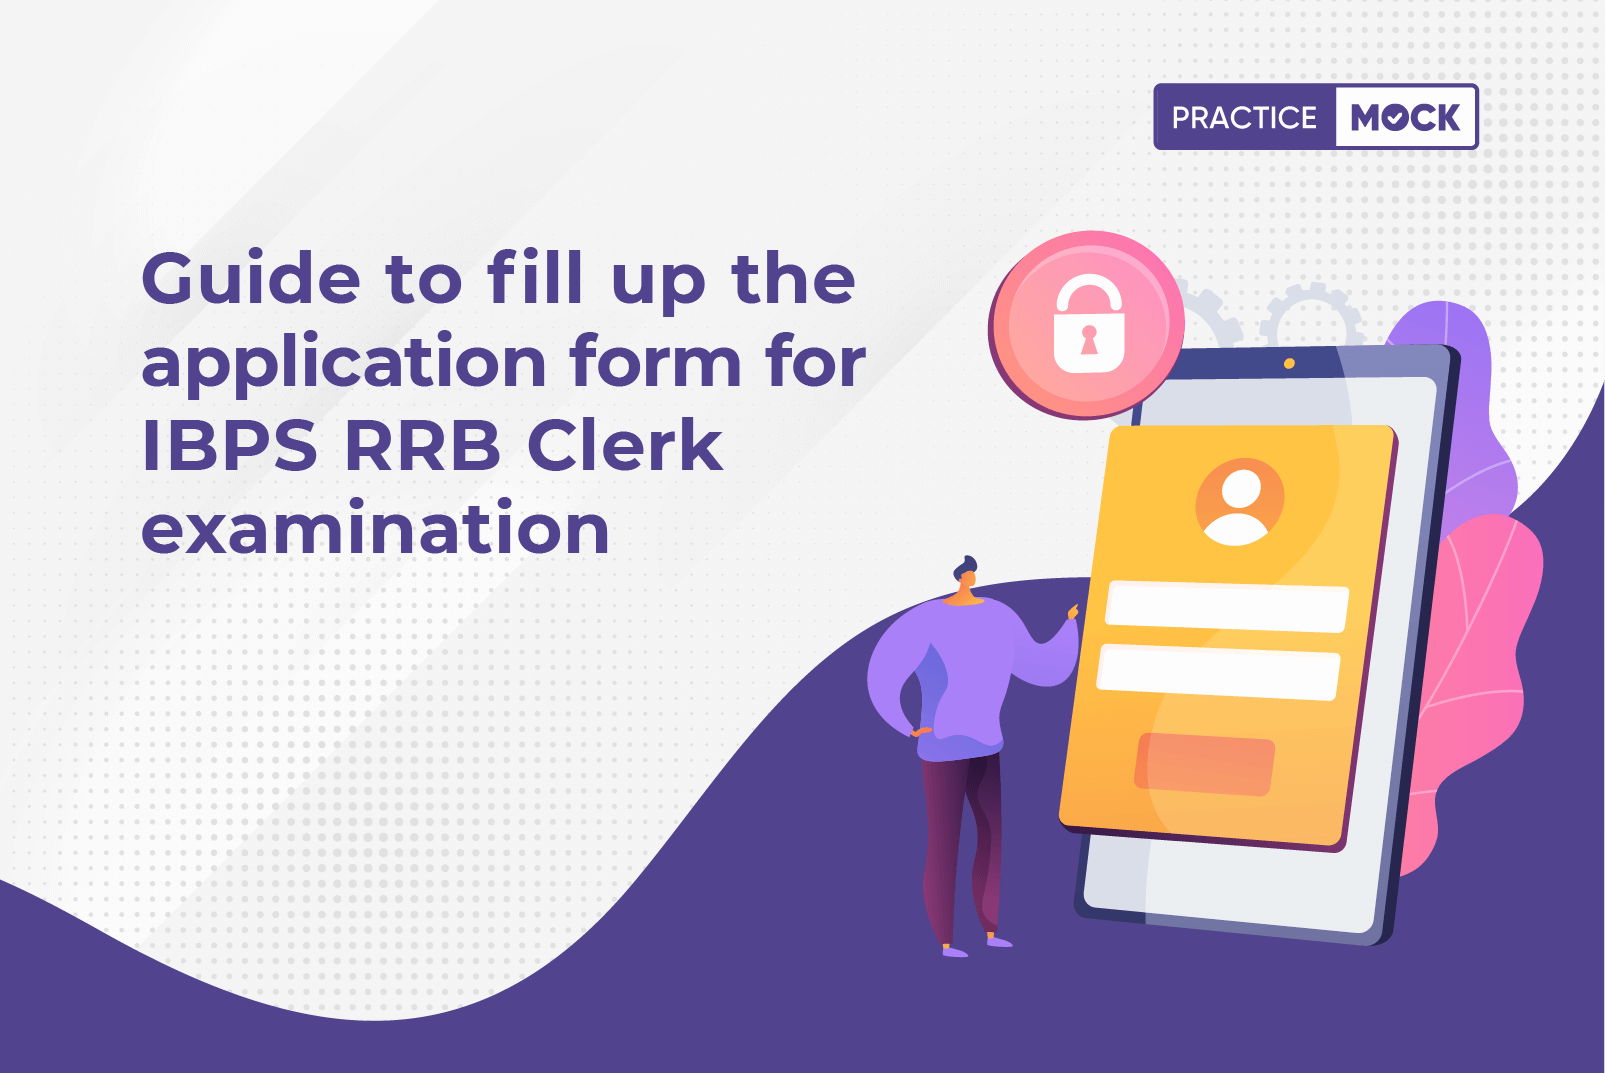 guide-to-fill-up-the-application-form-for-ibps-rrb-clerk-examination